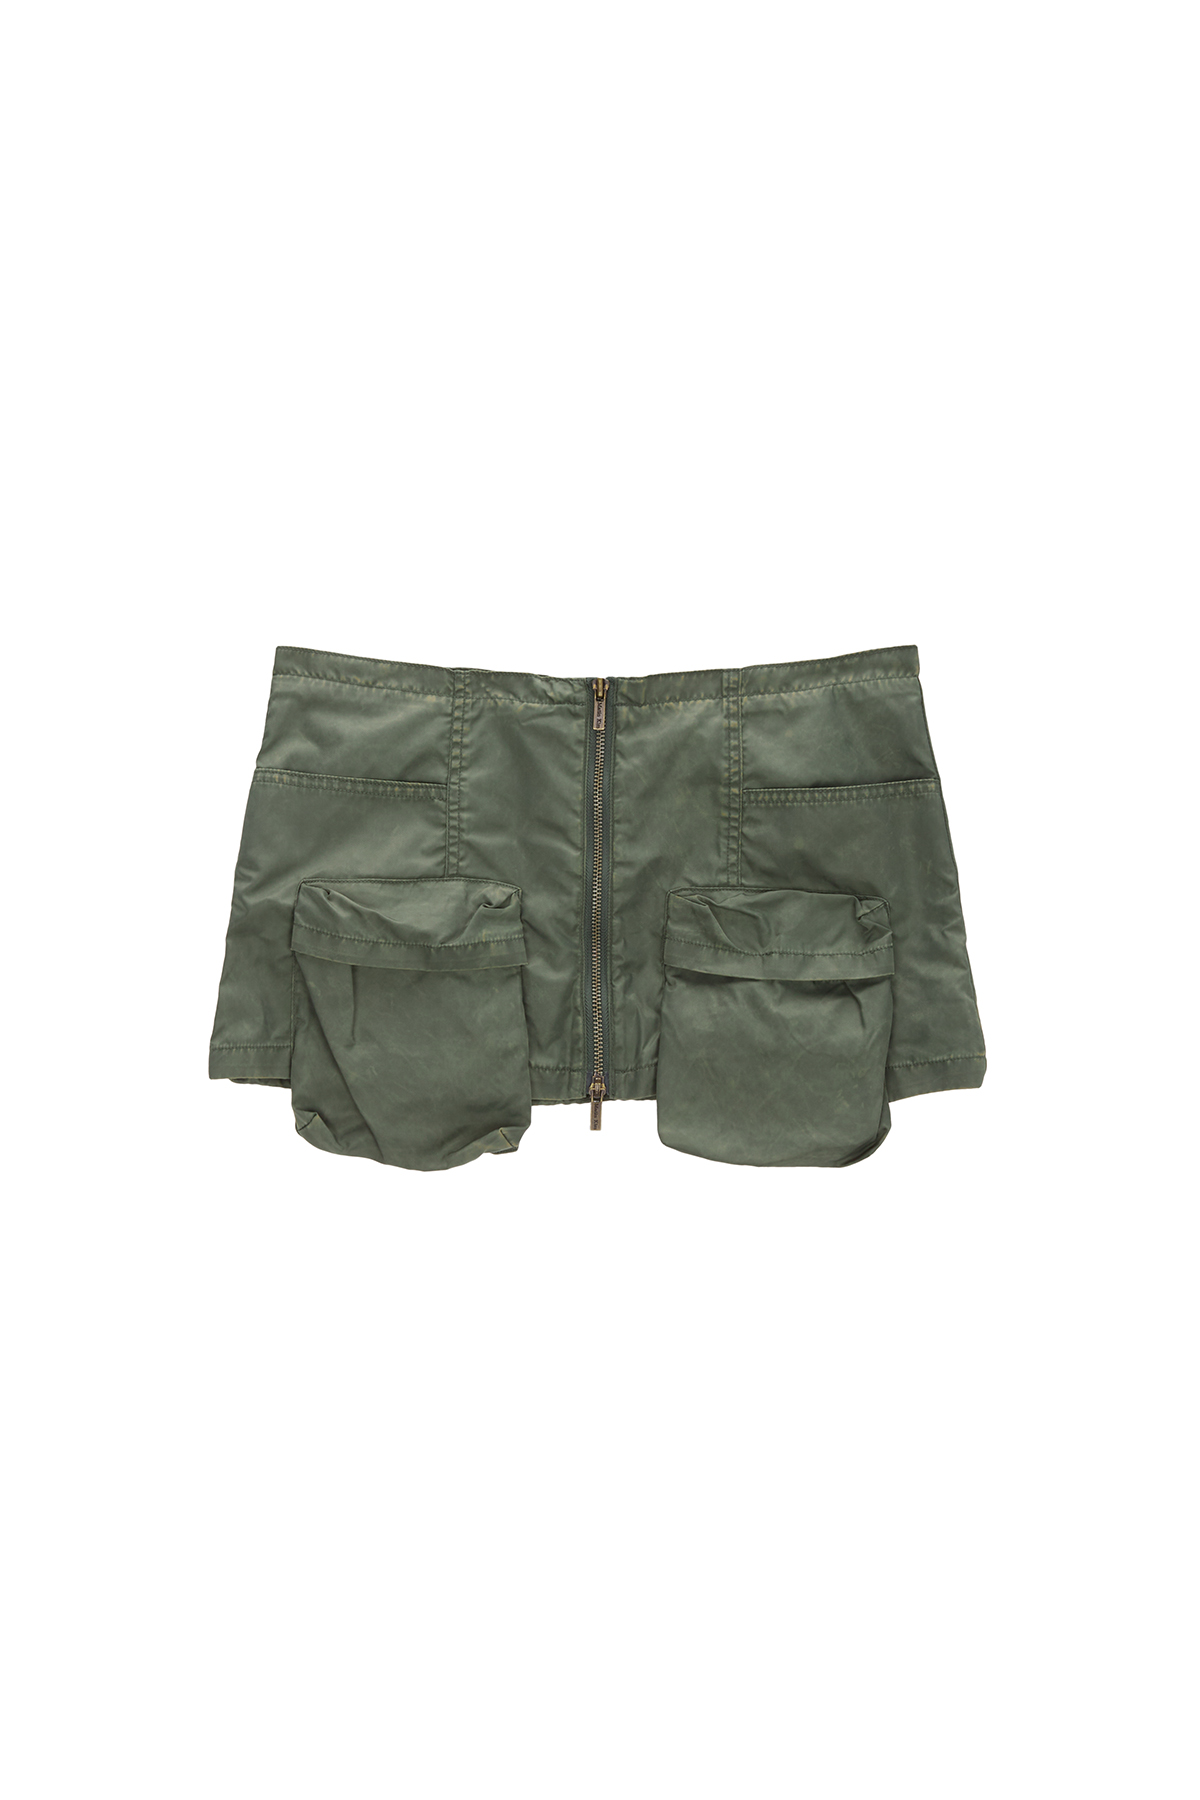 TWO WAY CARGO BELTED SKIRT IN KHAKI